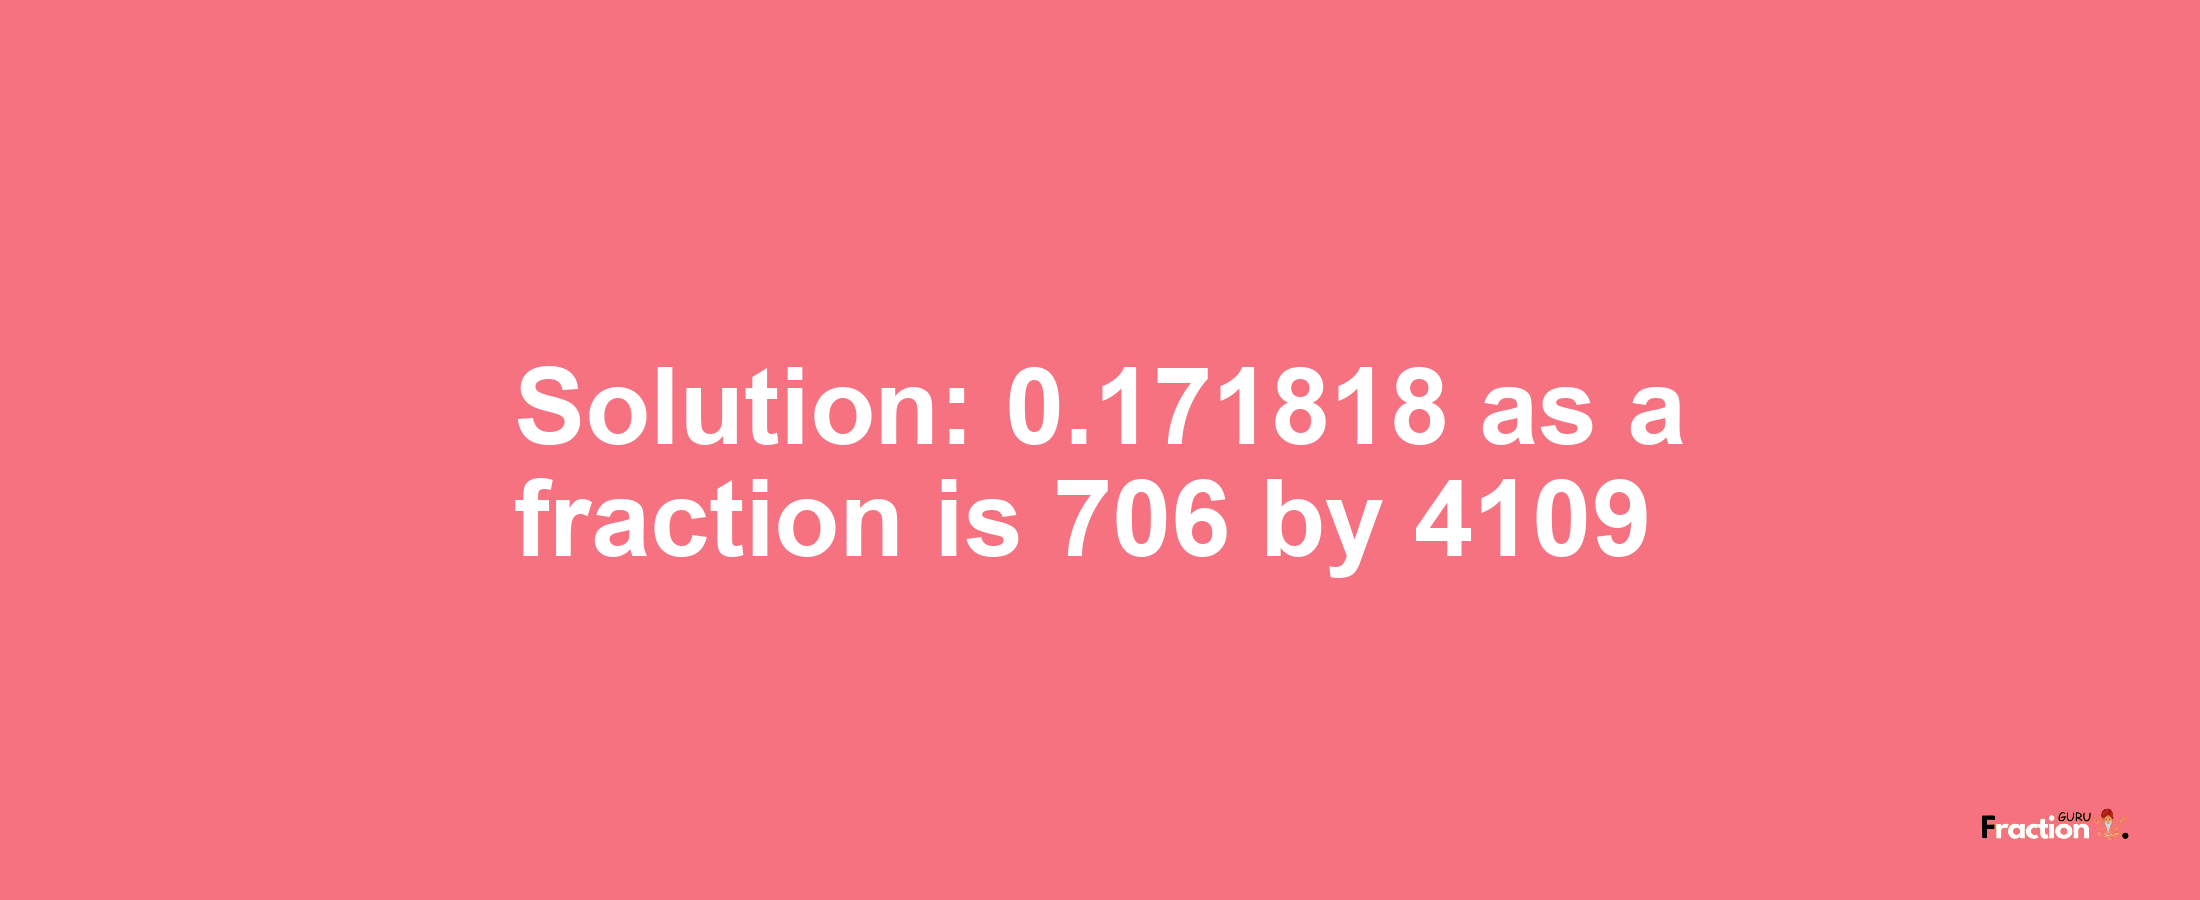 Solution:0.171818 as a fraction is 706/4109